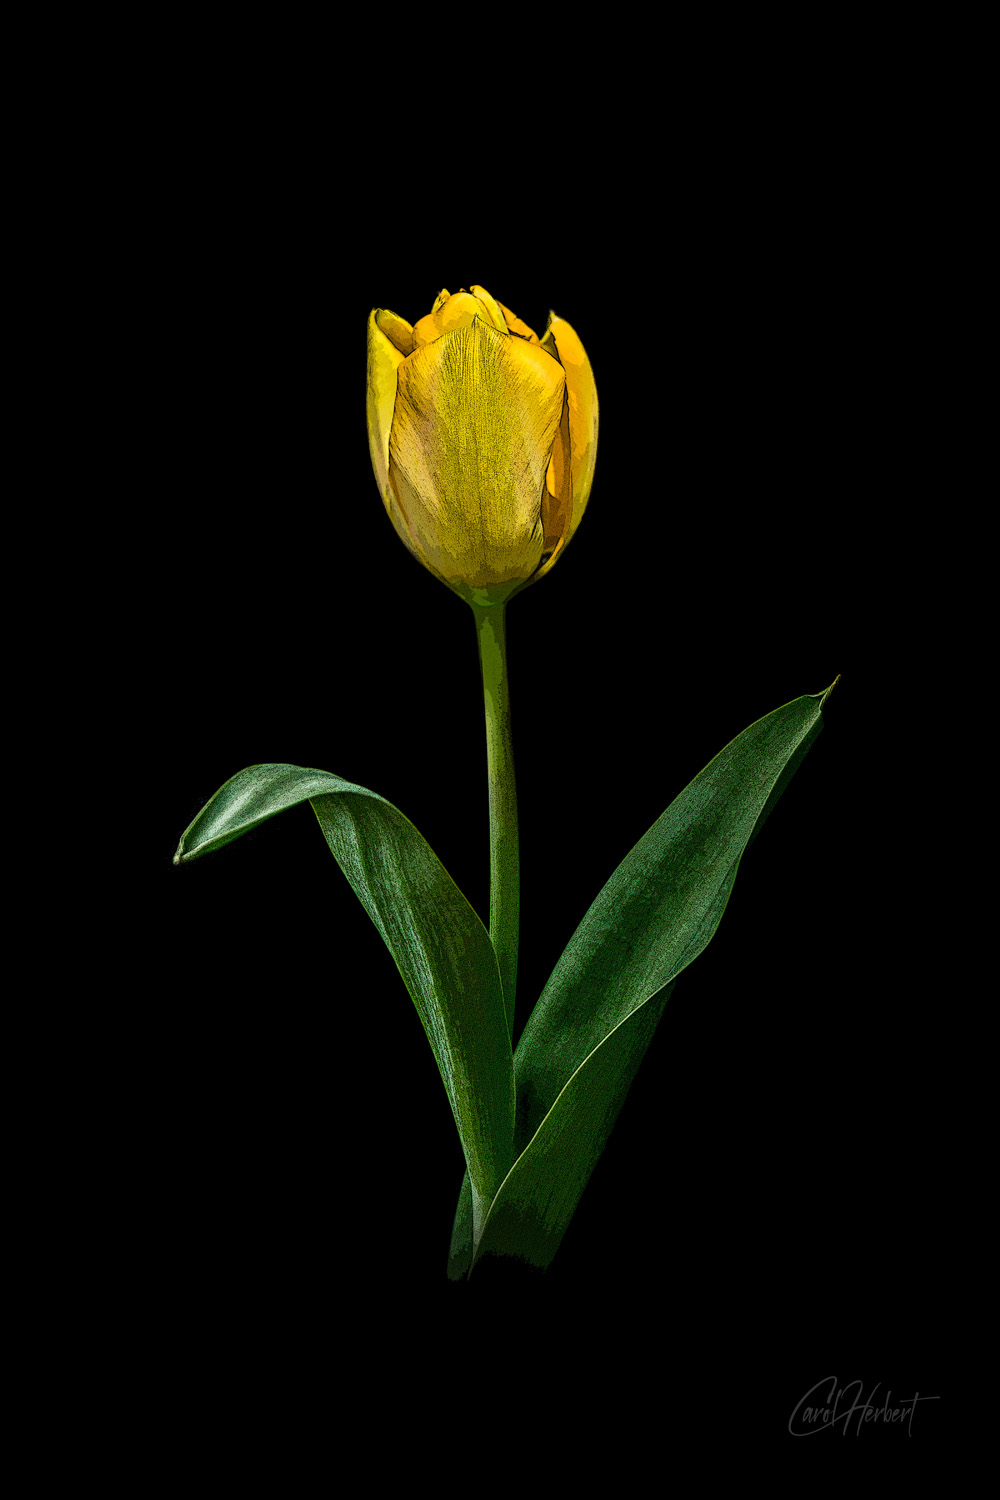 A single yellow tulip on a black background in a pop art style